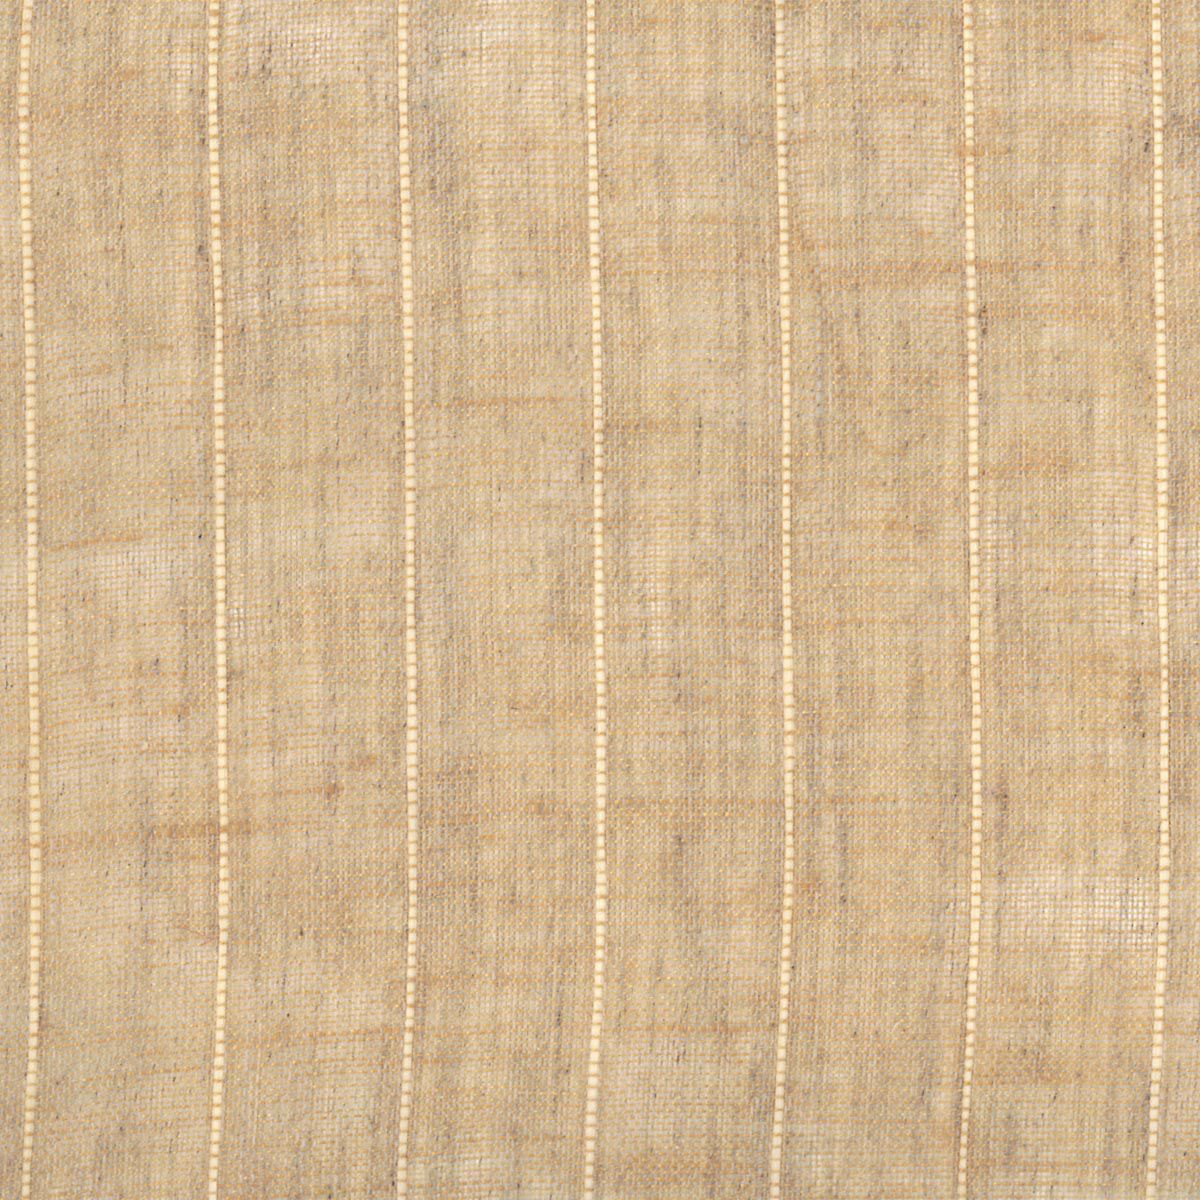 Haverford Stripe fabric in amber color - pattern number P0 00031418 - by Scalamandre in the Old World Weavers collection